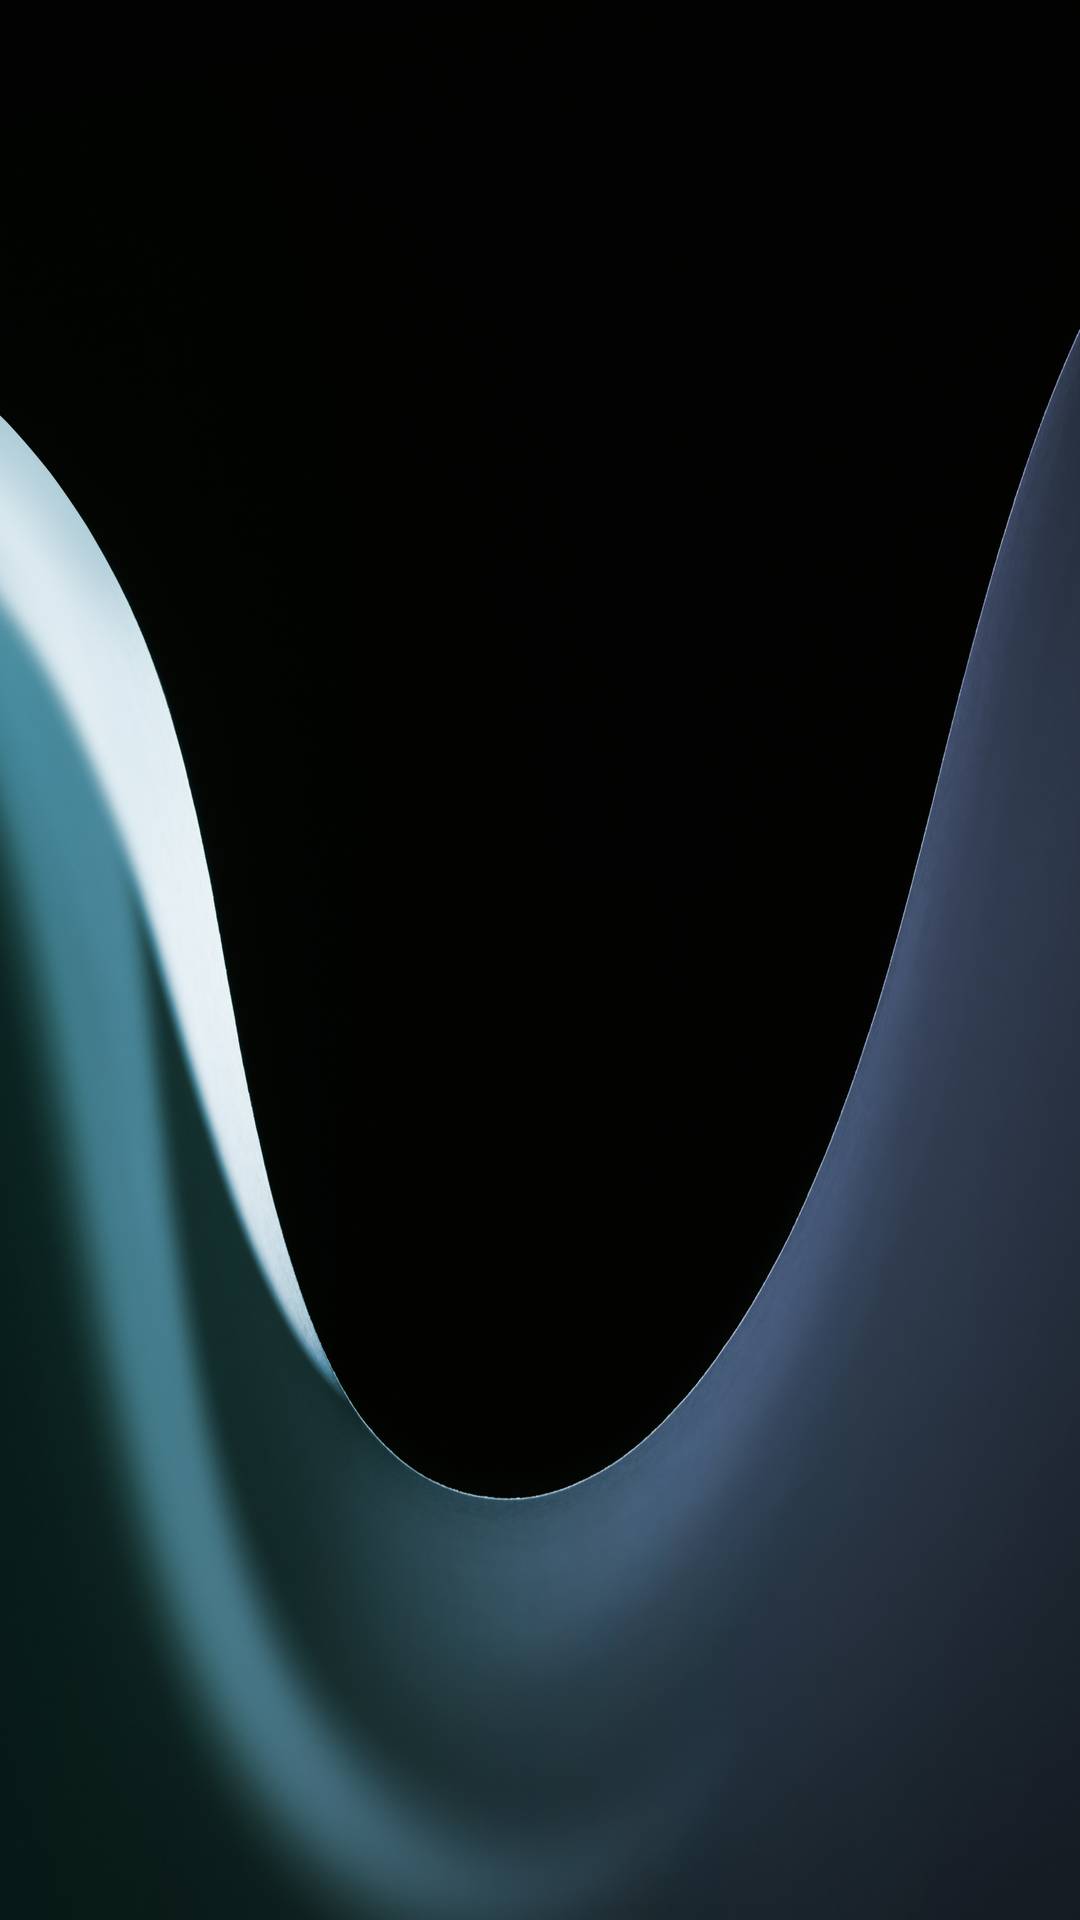 Android 9 Pie Stock Wallpaper 11 - [1080x1920]